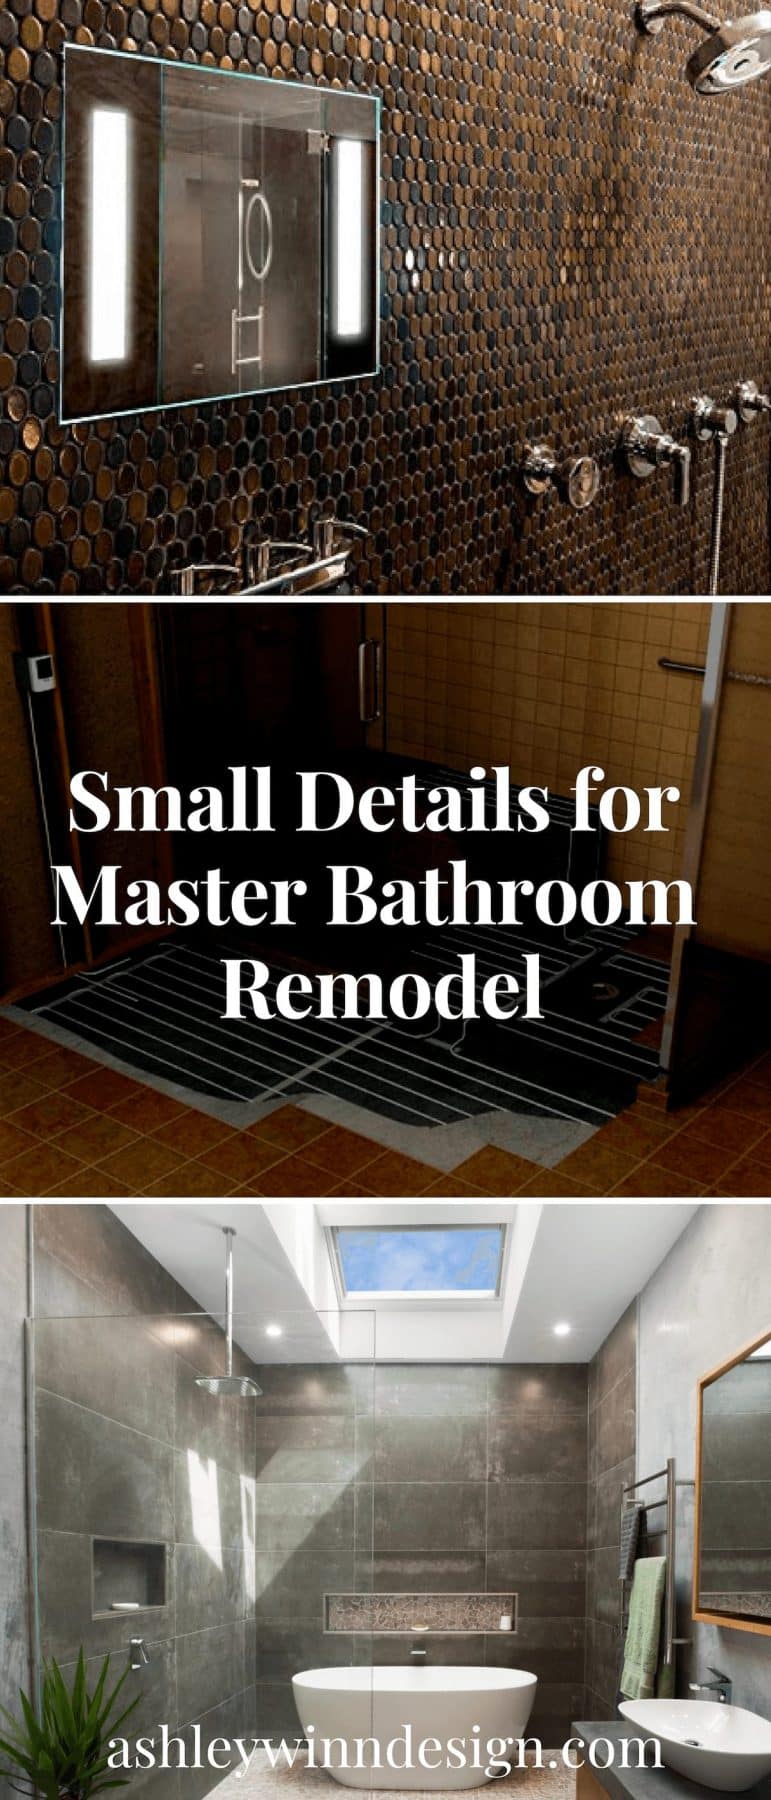 Small Details for Master Bathroom Remodel